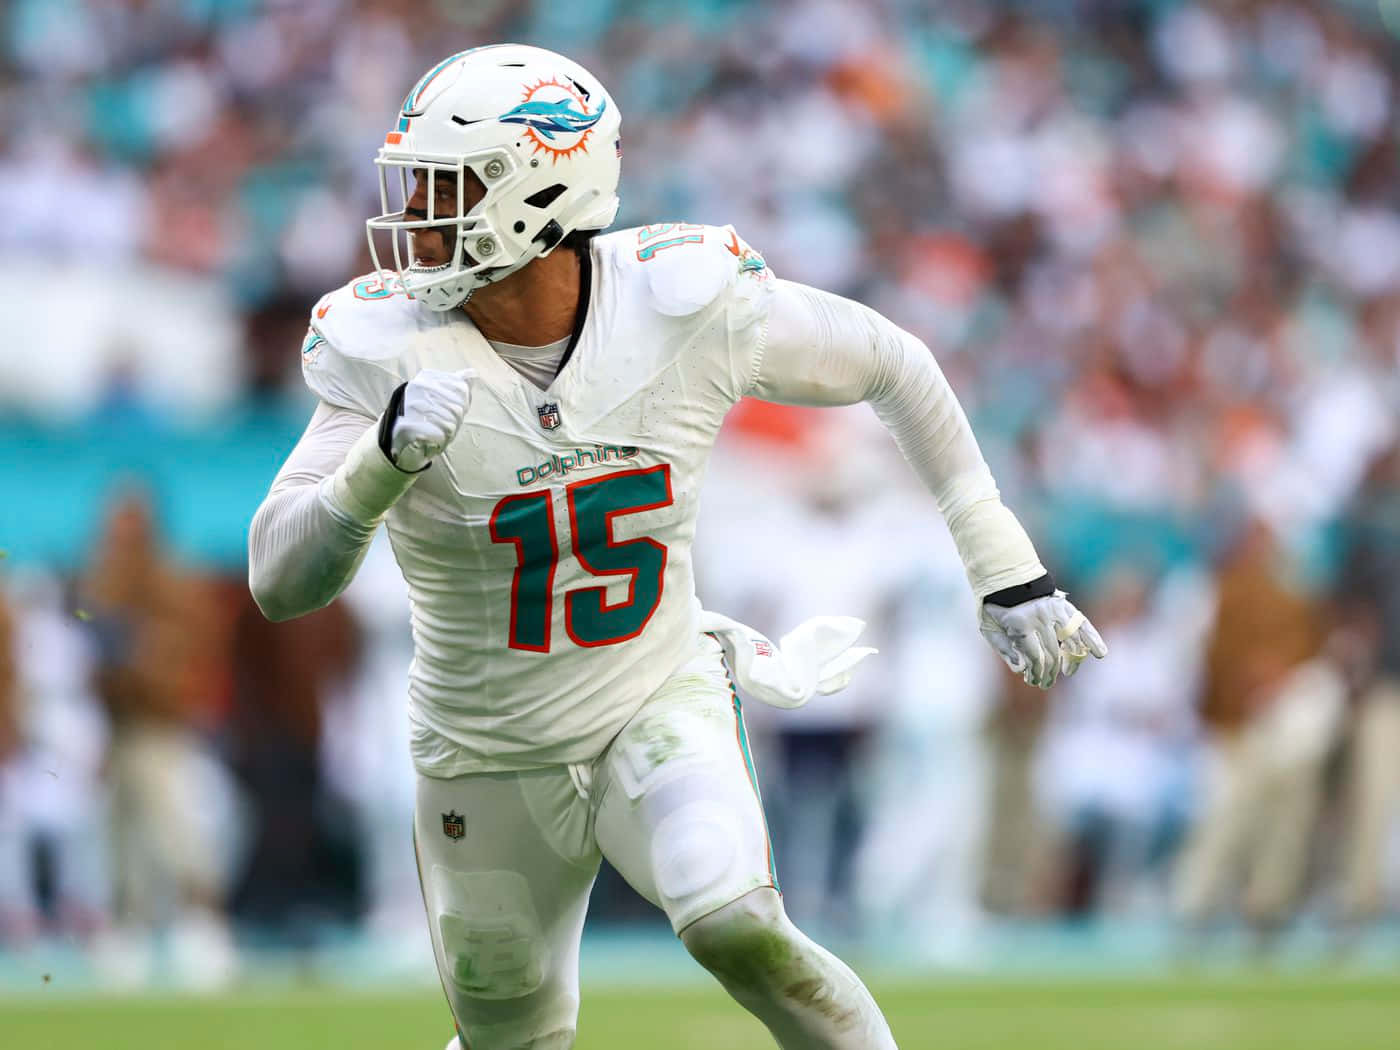 Miami Dolphins Player Number15 In Action Wallpaper